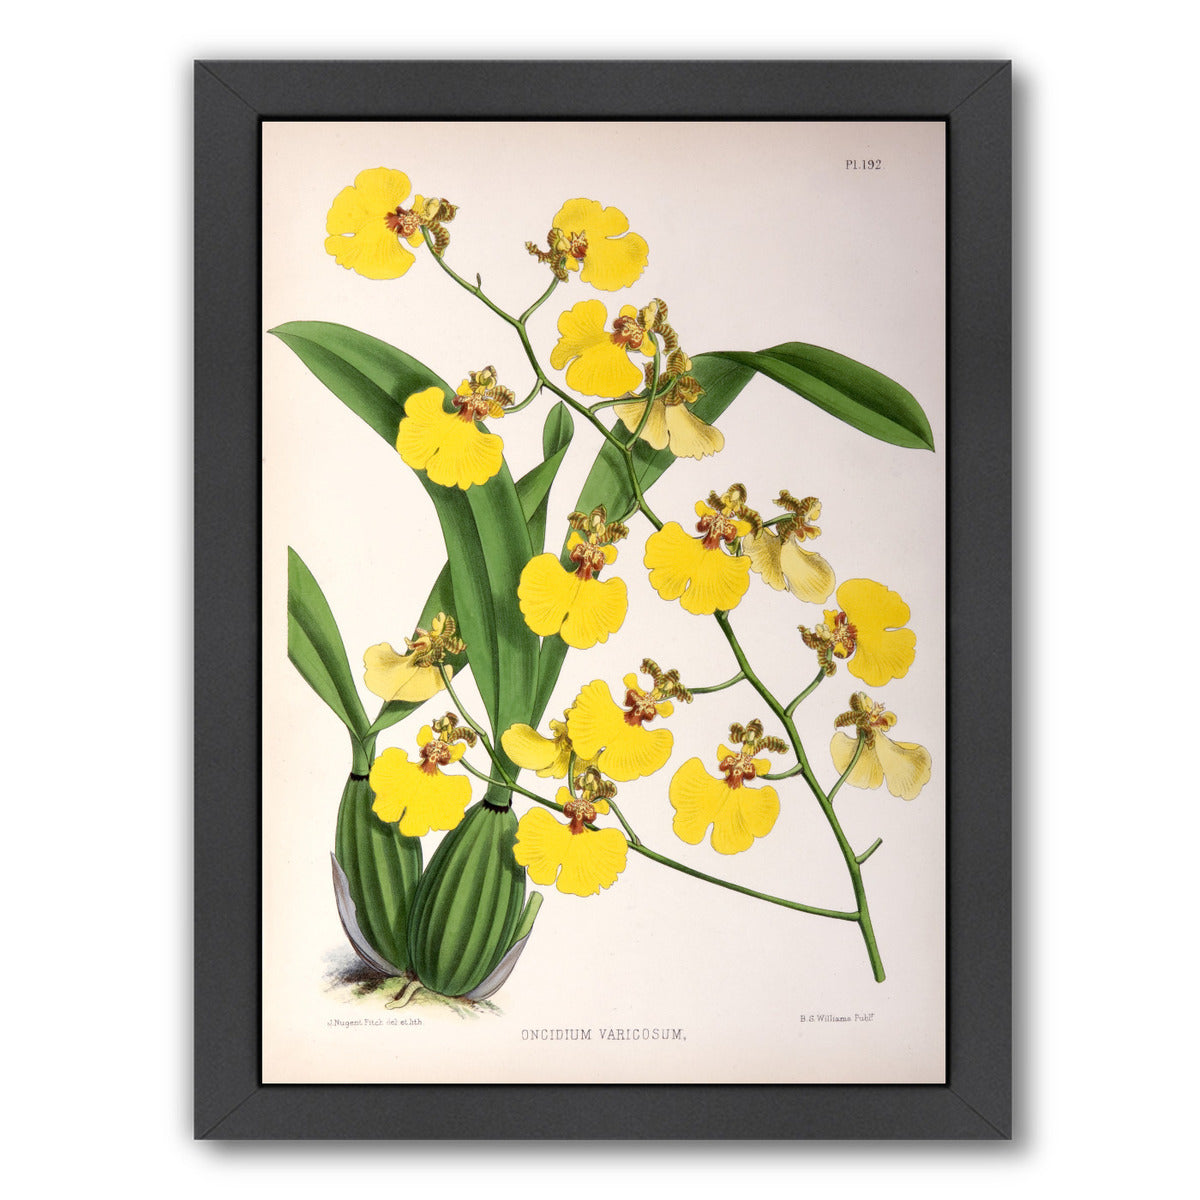 Fitch Orchid Oncidium Varicosum by New York Botanical Garden Framed Print - Americanflat